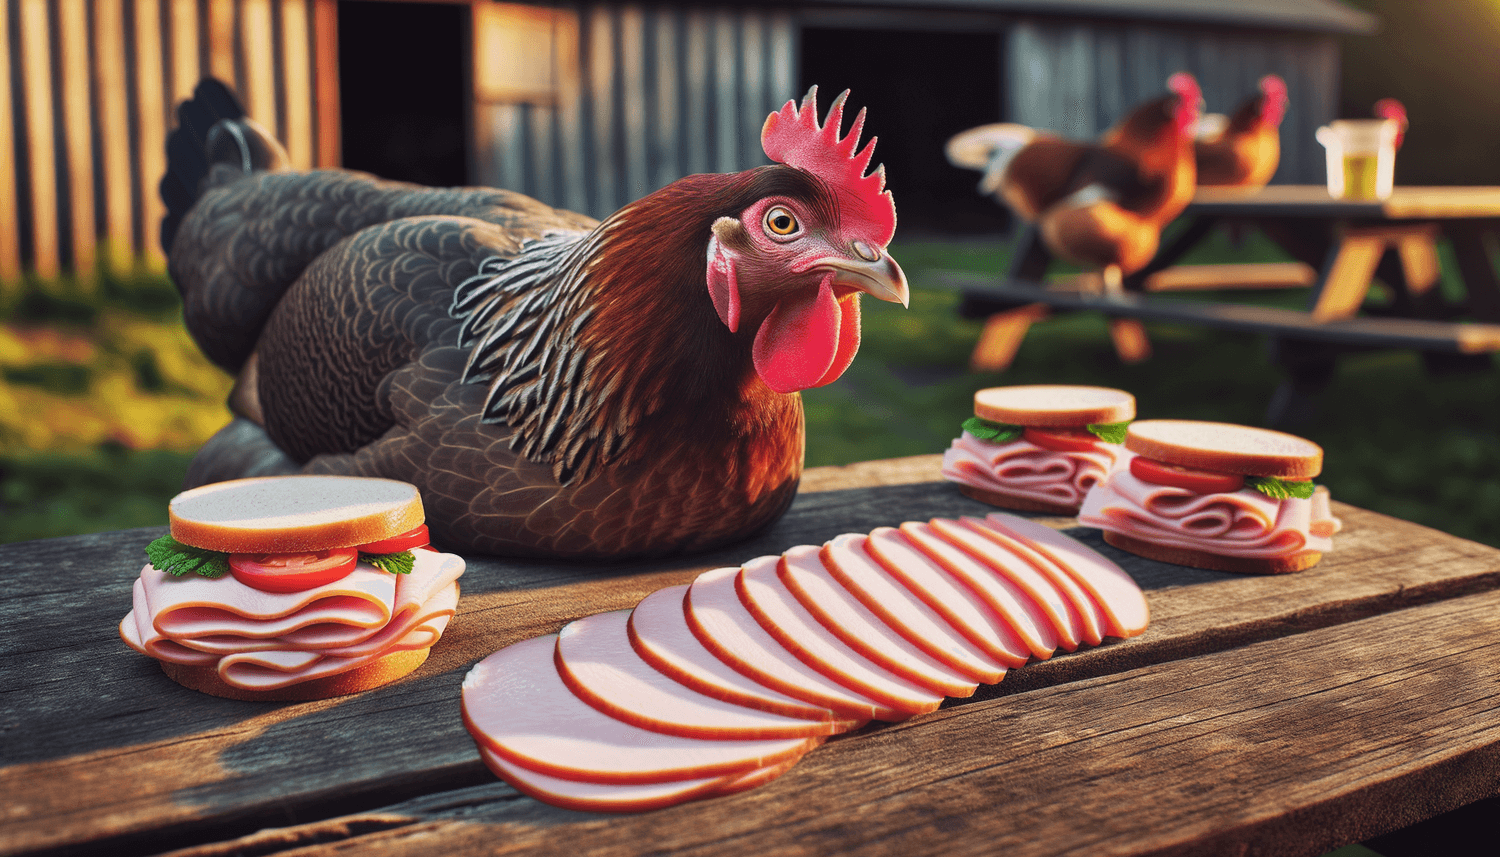 Can Chickens Eat Turkey Lunch Meat?